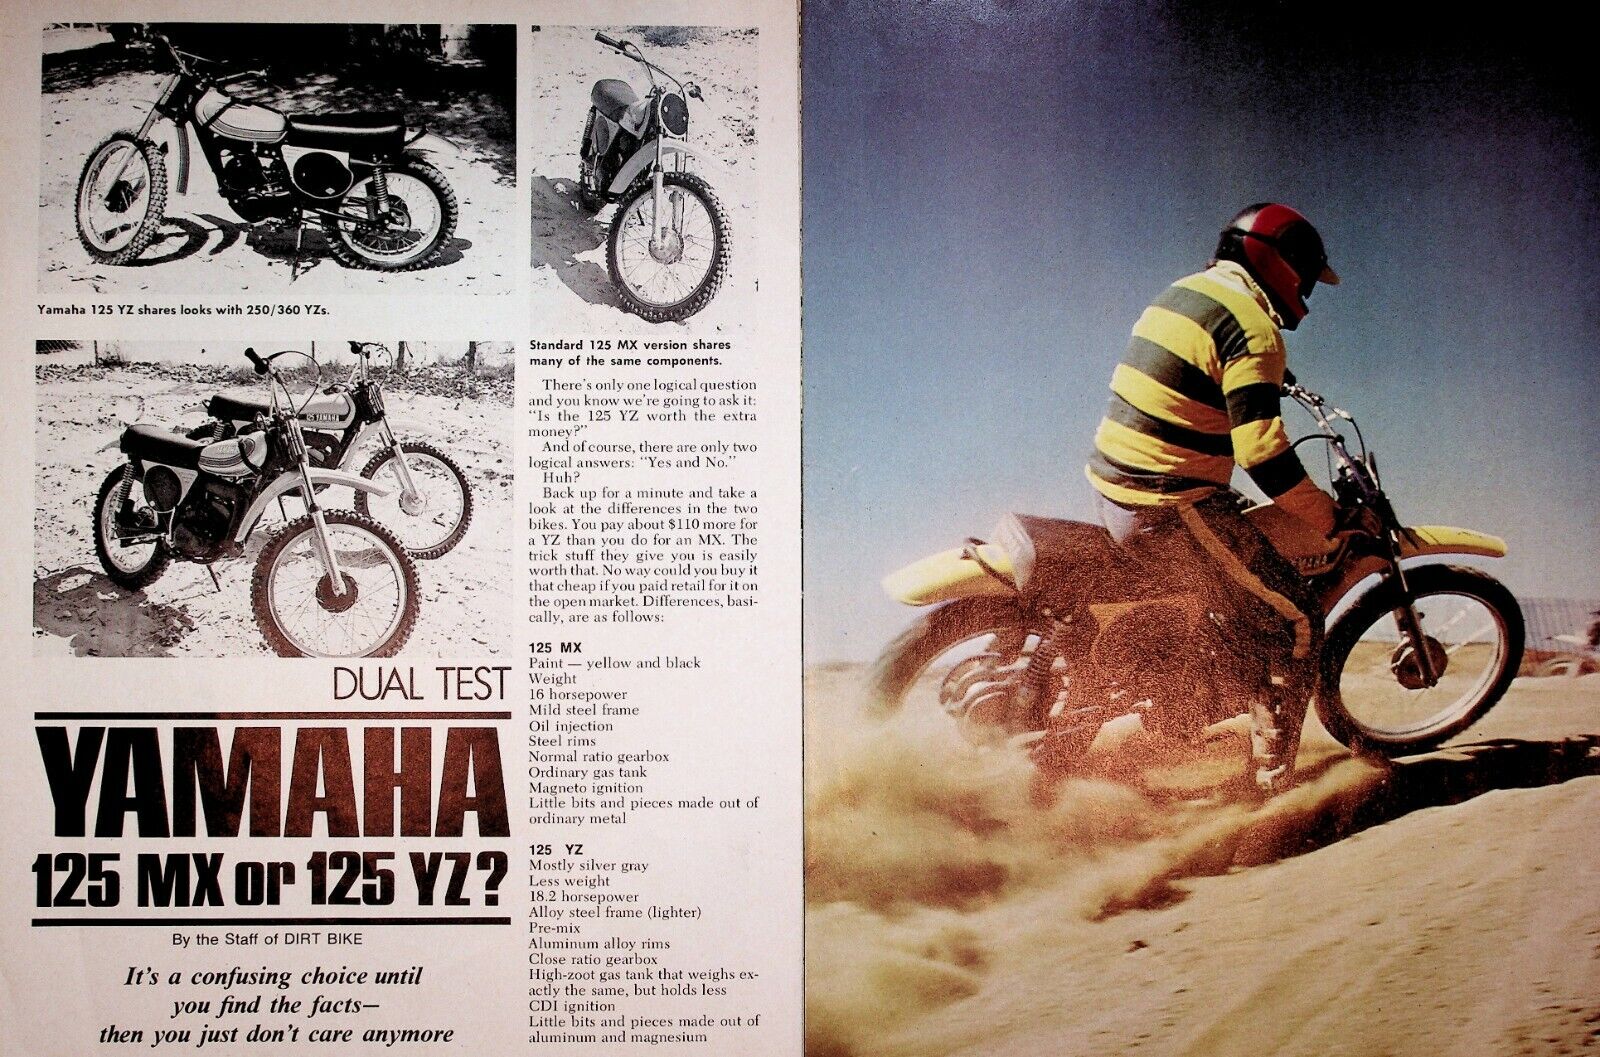 1974 Yamaha 125 MX or 125 YZ - 10-Page Vintage Motocross Motorcycle Test Article